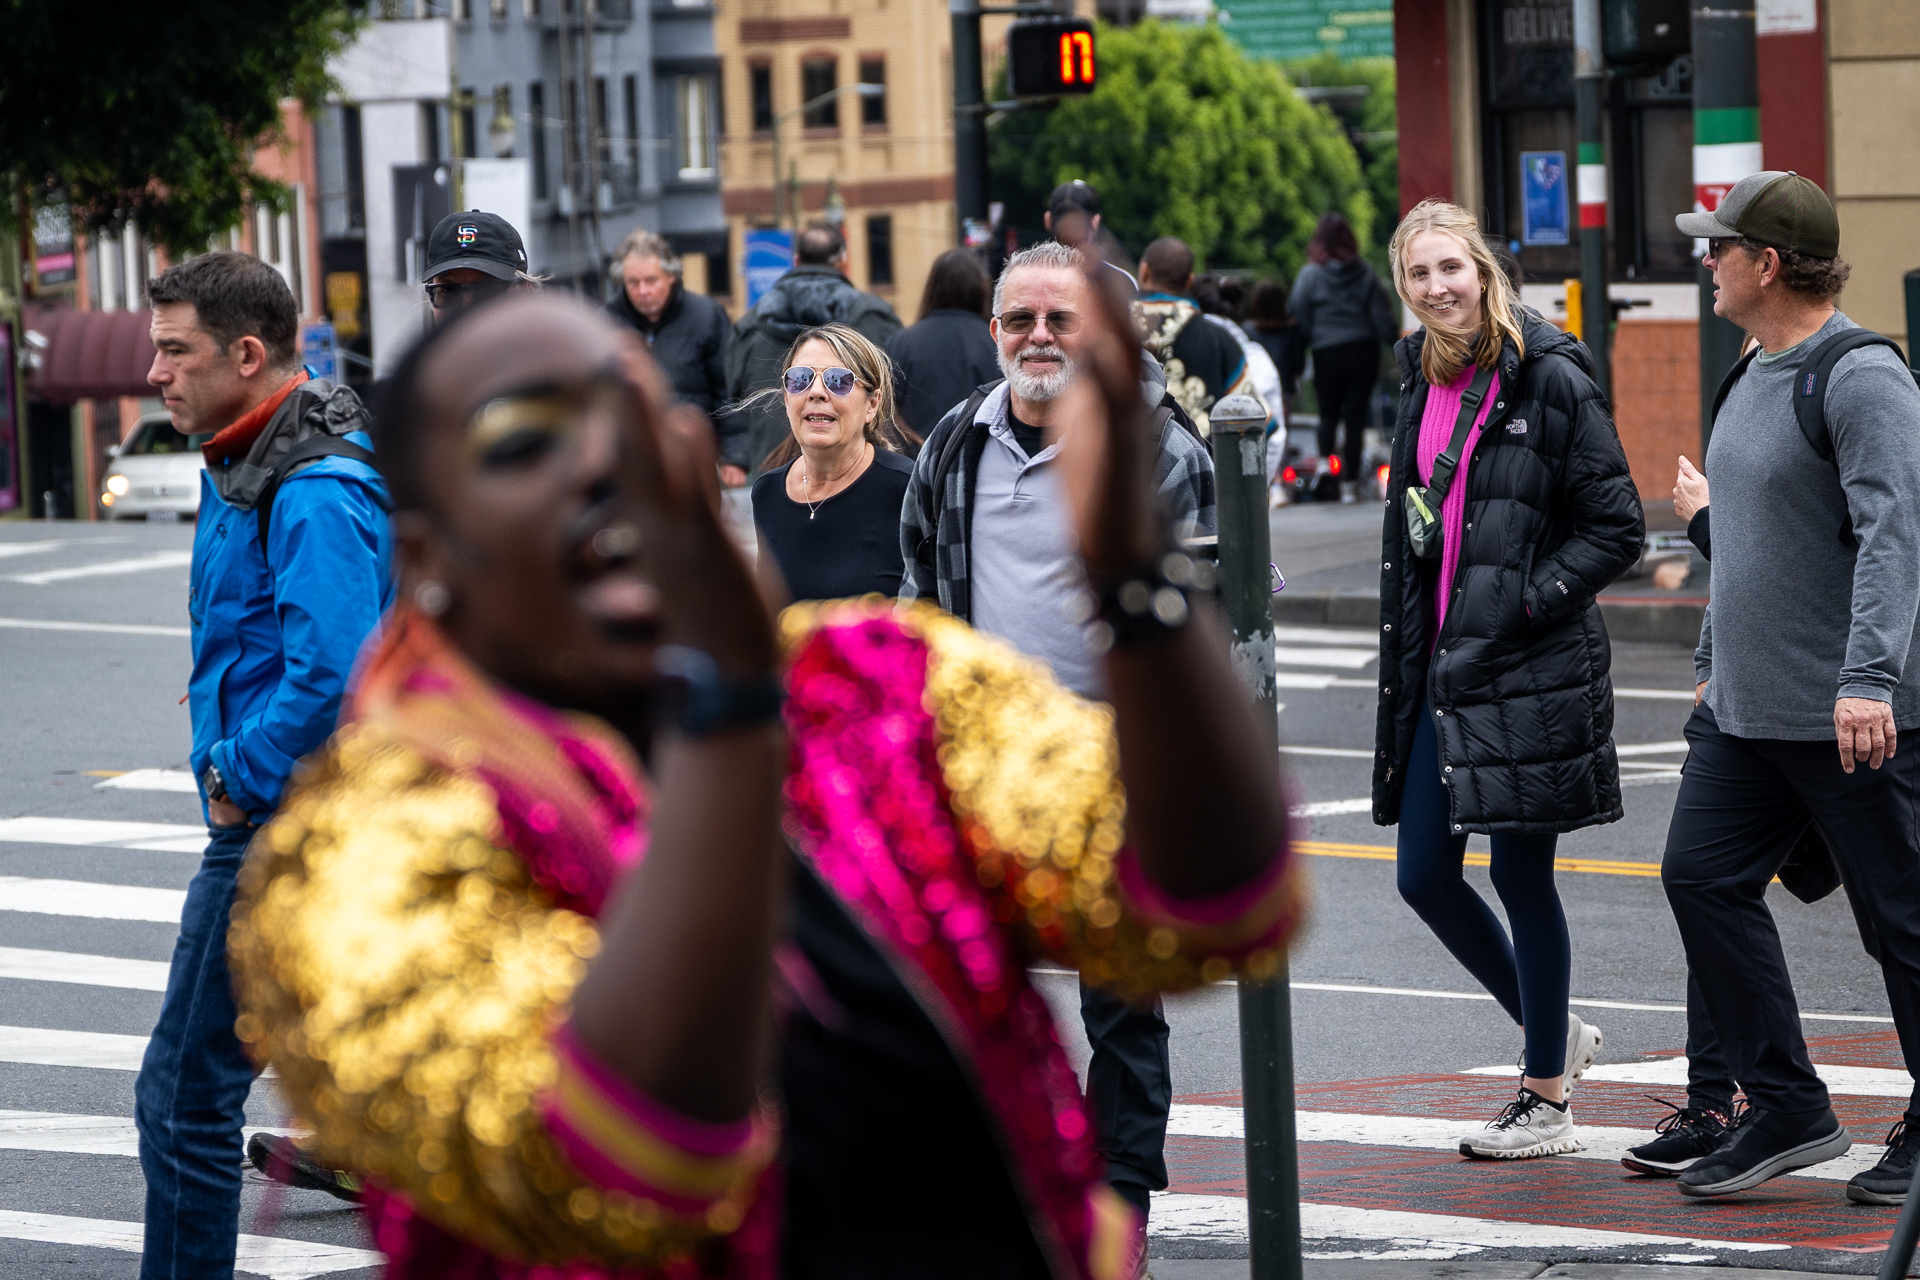 An African American drag artist performs as passersby look on and cheer.